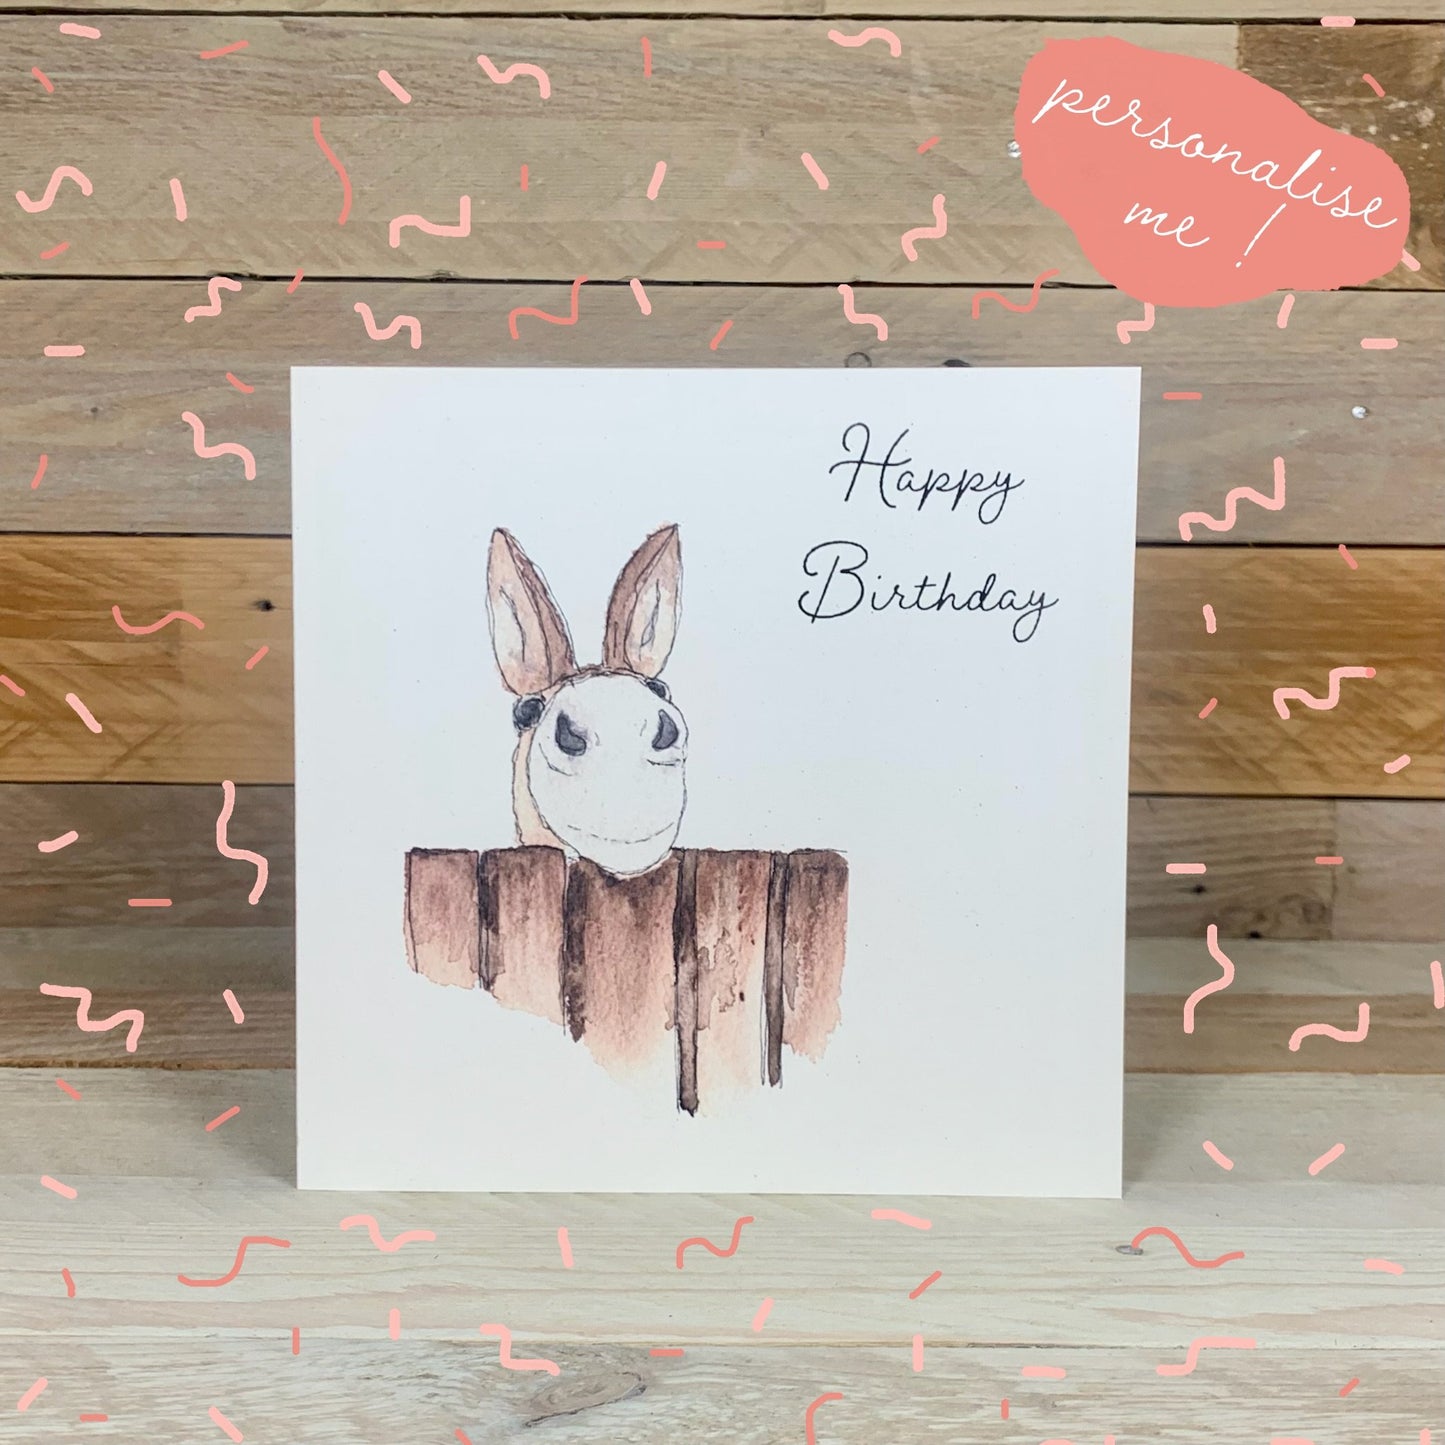 Dotty the Donkey Card - Arty Bee Designs 